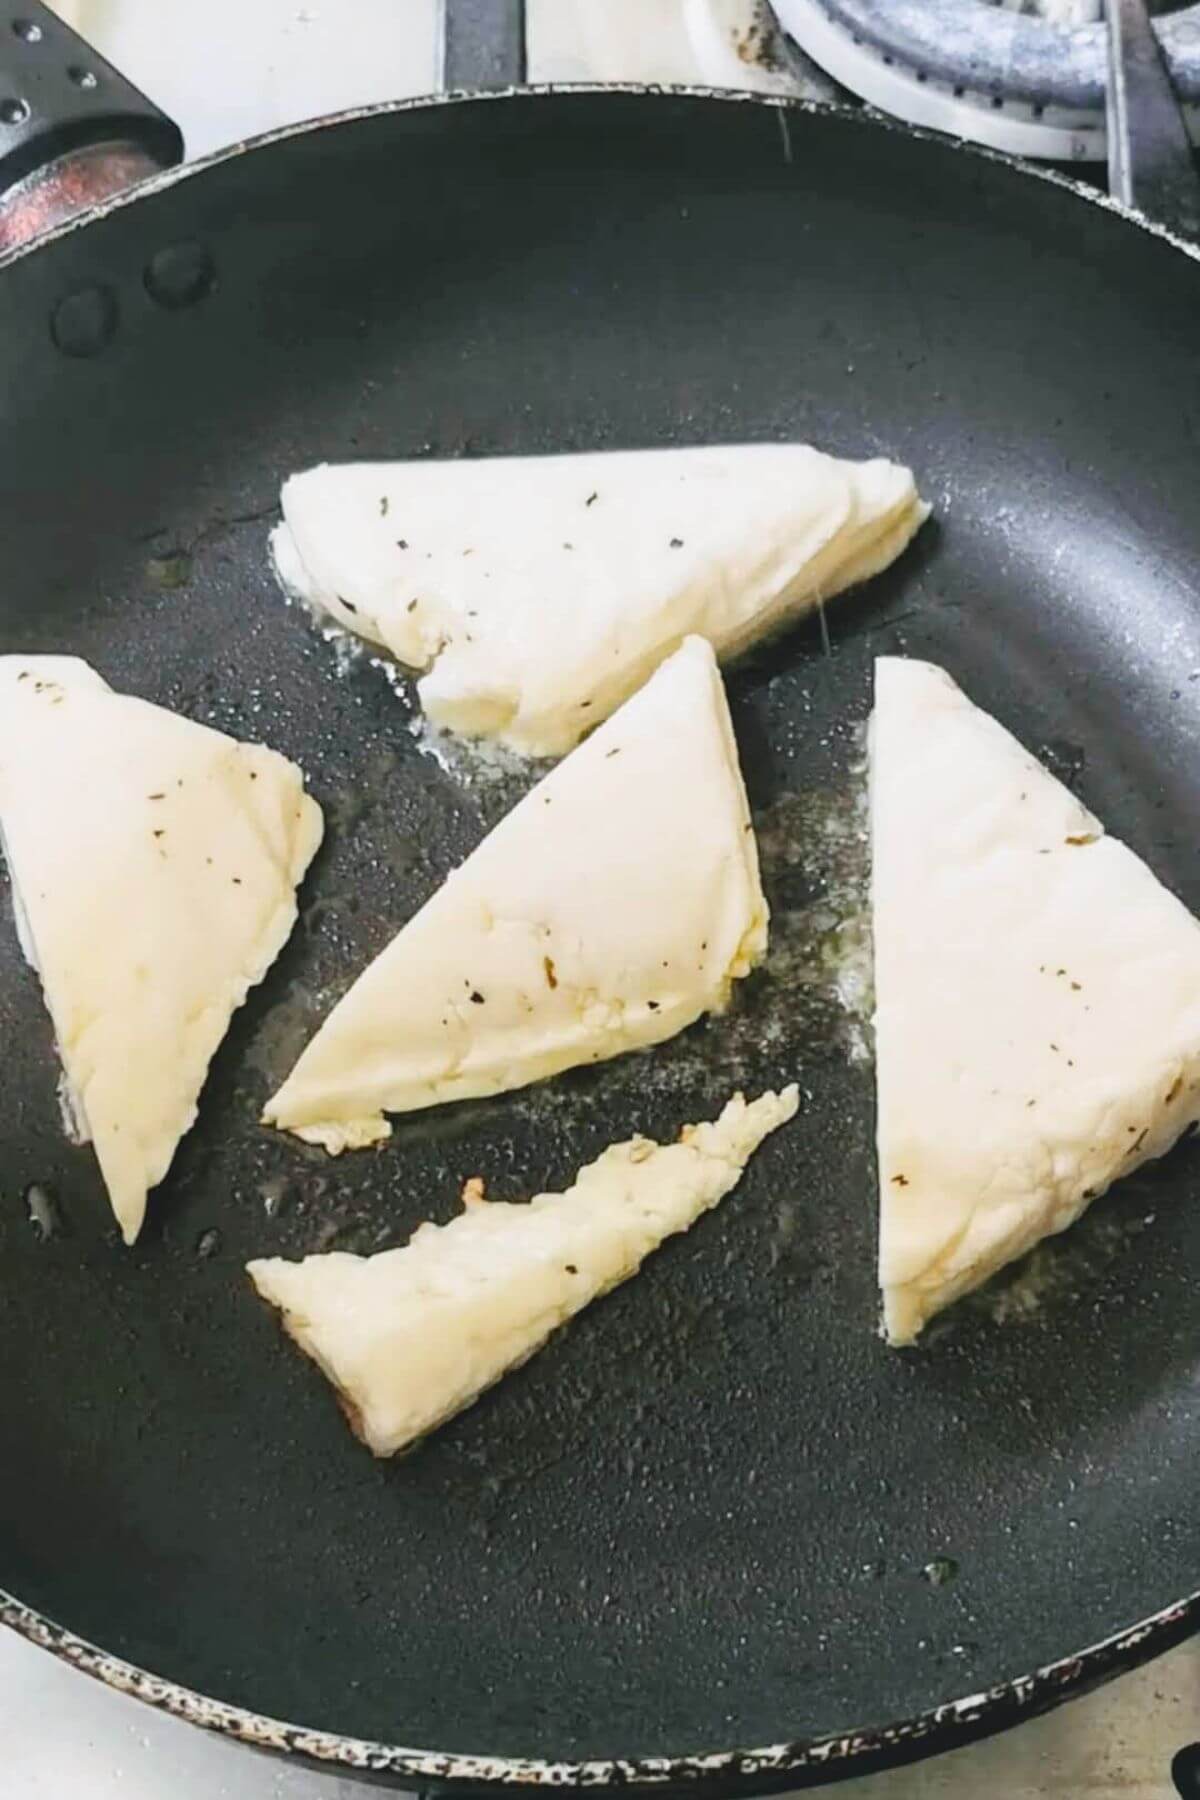 Five halloumi triangles cooking in the pan